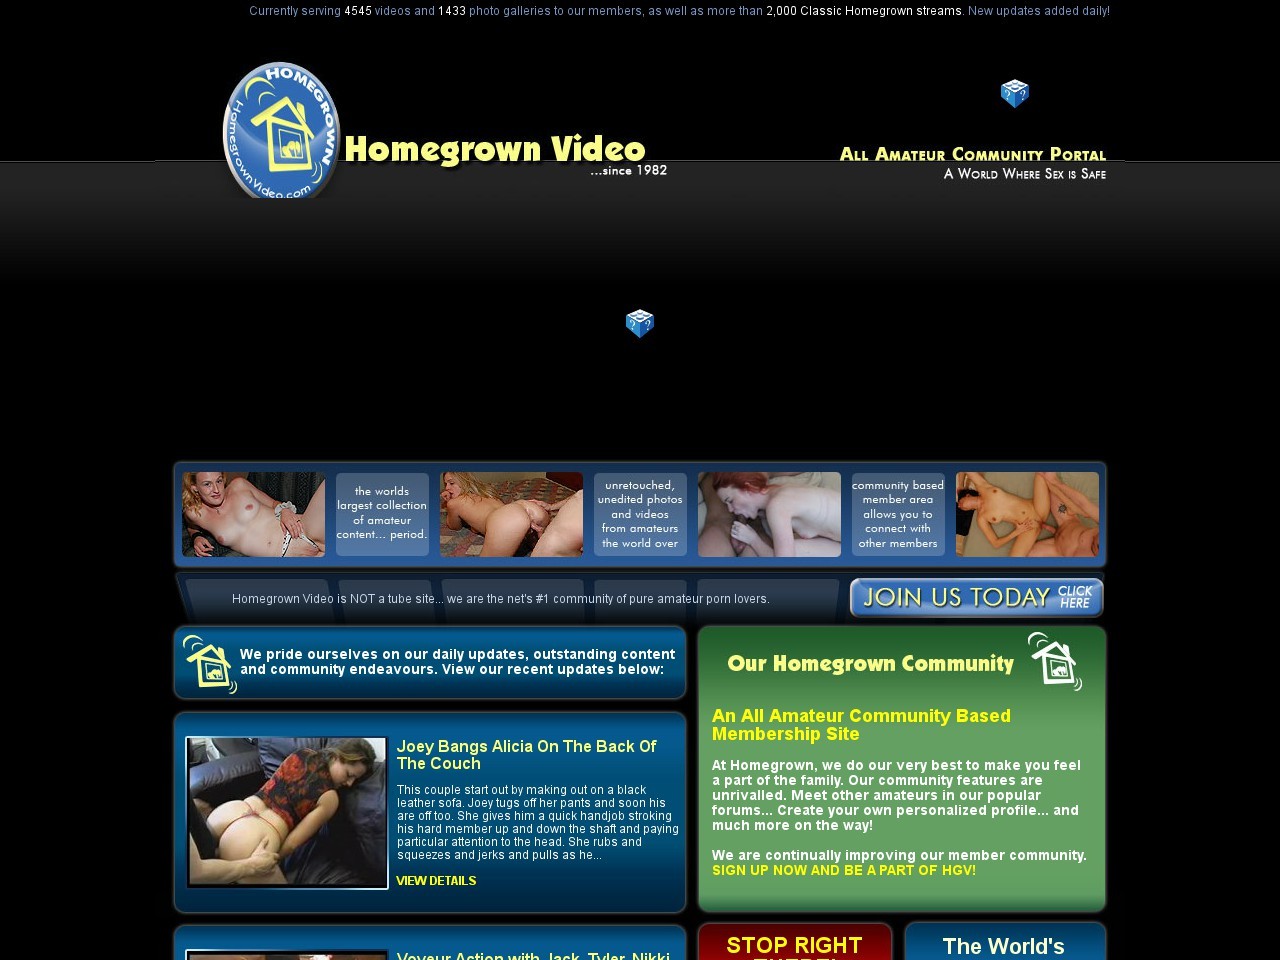 HomeGrownVideo image pic